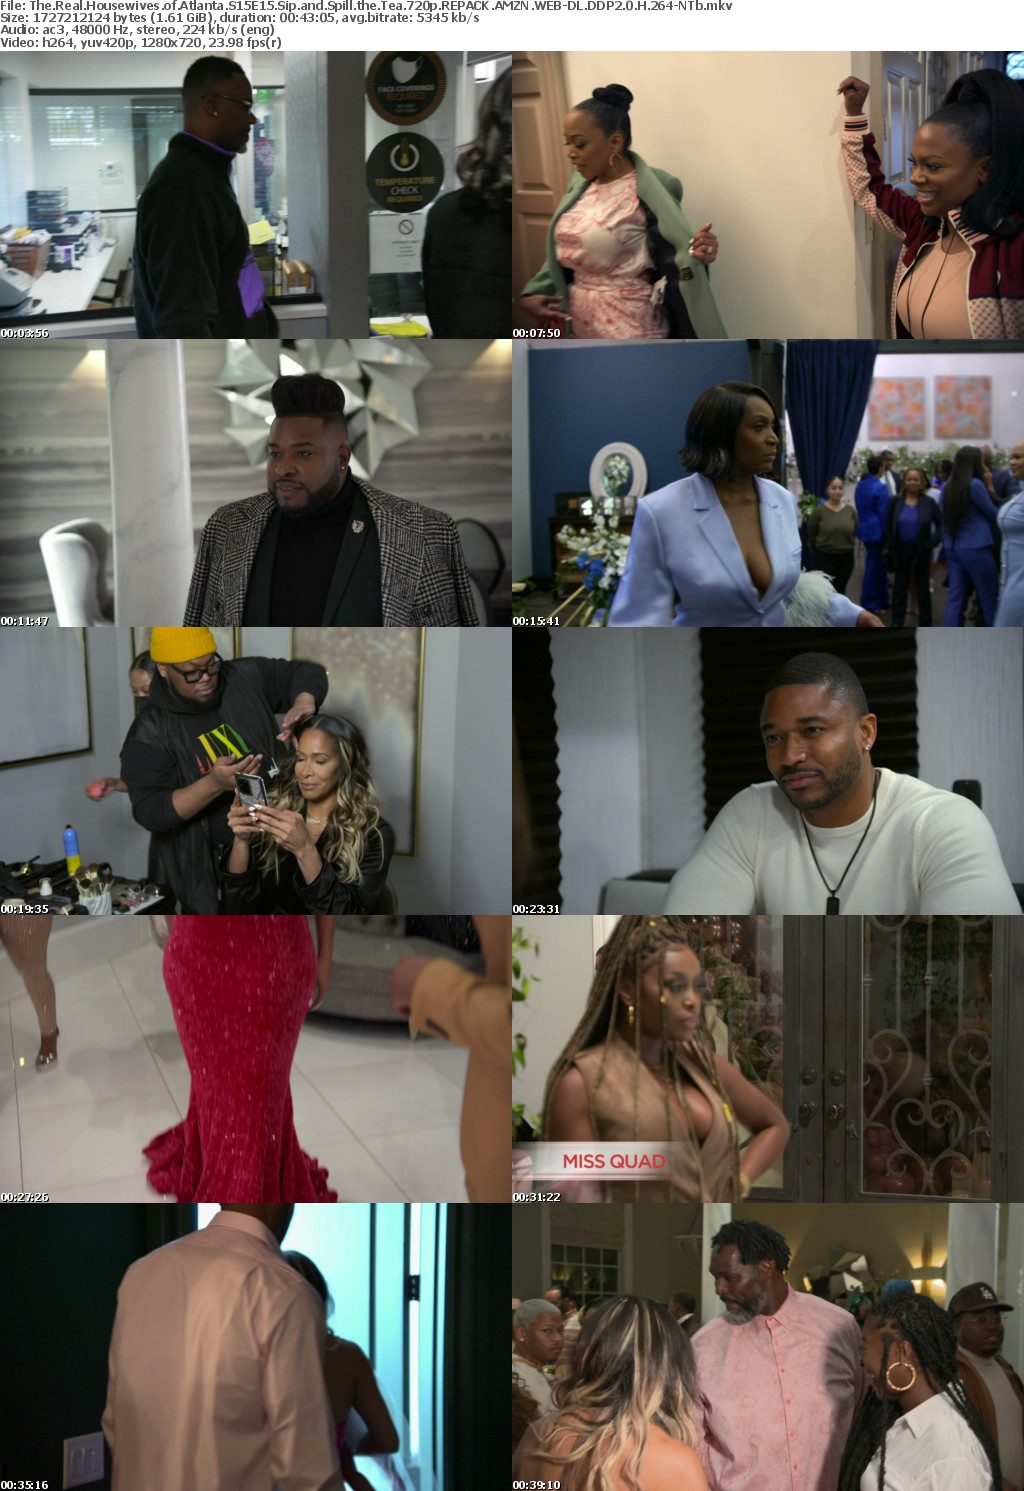 The Real Housewives of Atlanta S15E15 Sip and Spill the Tea 720p REPACK AMZN WEB-DL DDP2 0 H 264-NTb